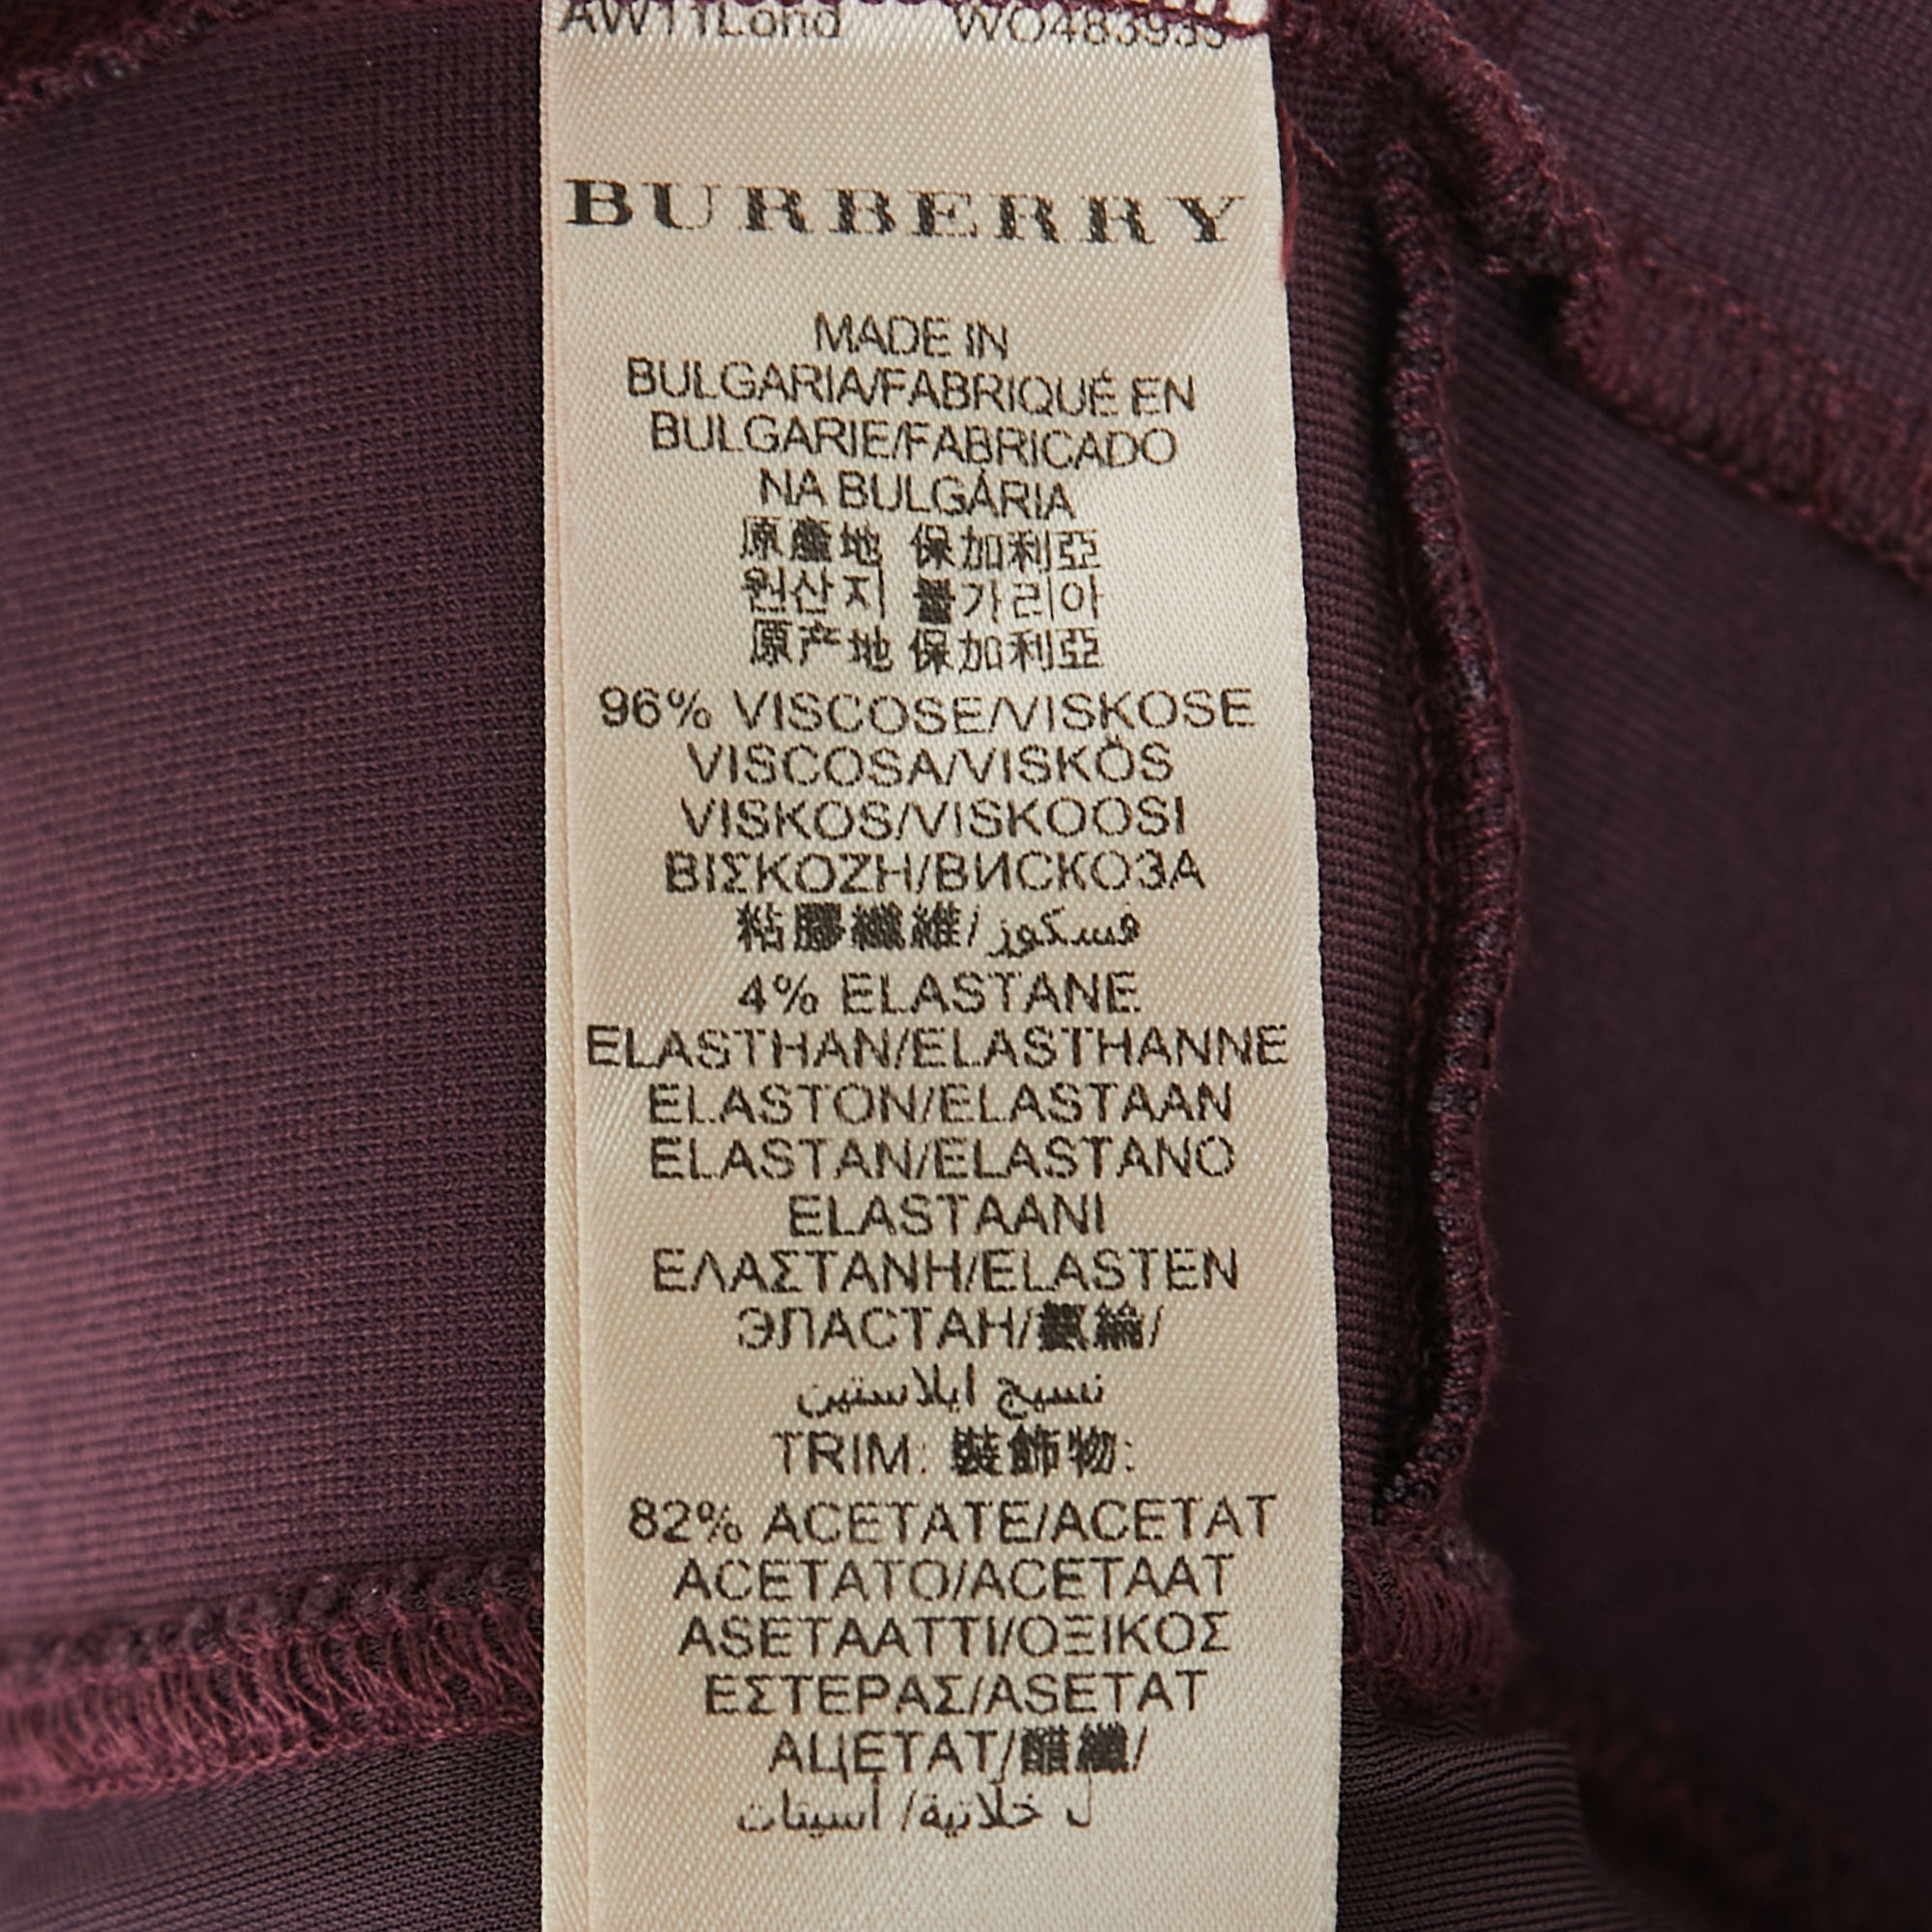 Burberry Purple Jersey Ruched Bodycon Dress S